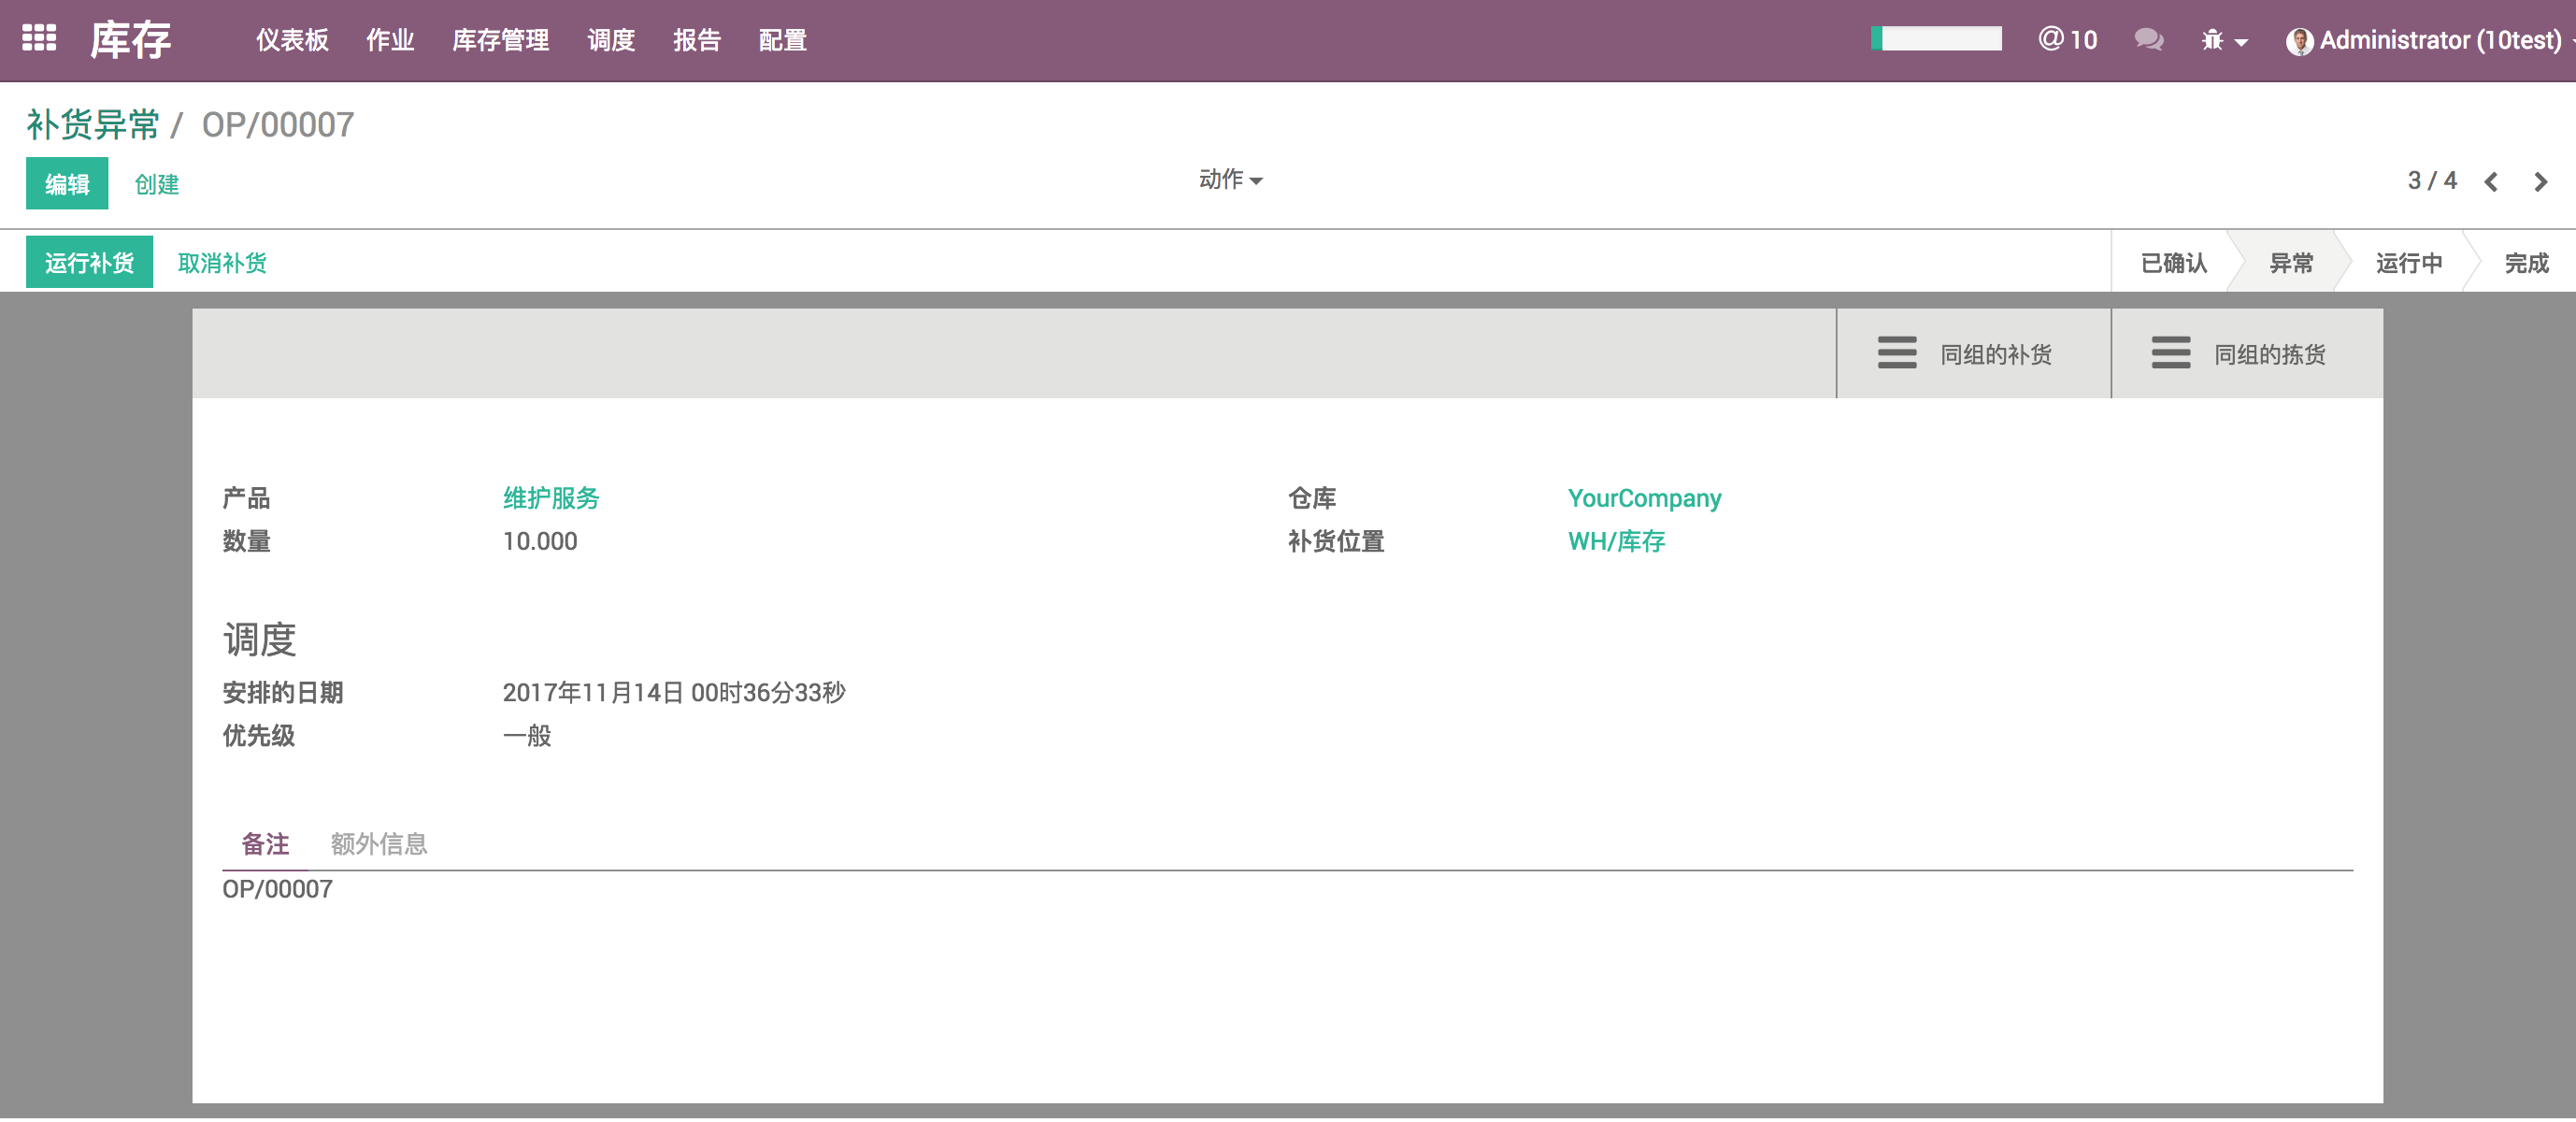 Commit a1ad637 log for Odoo